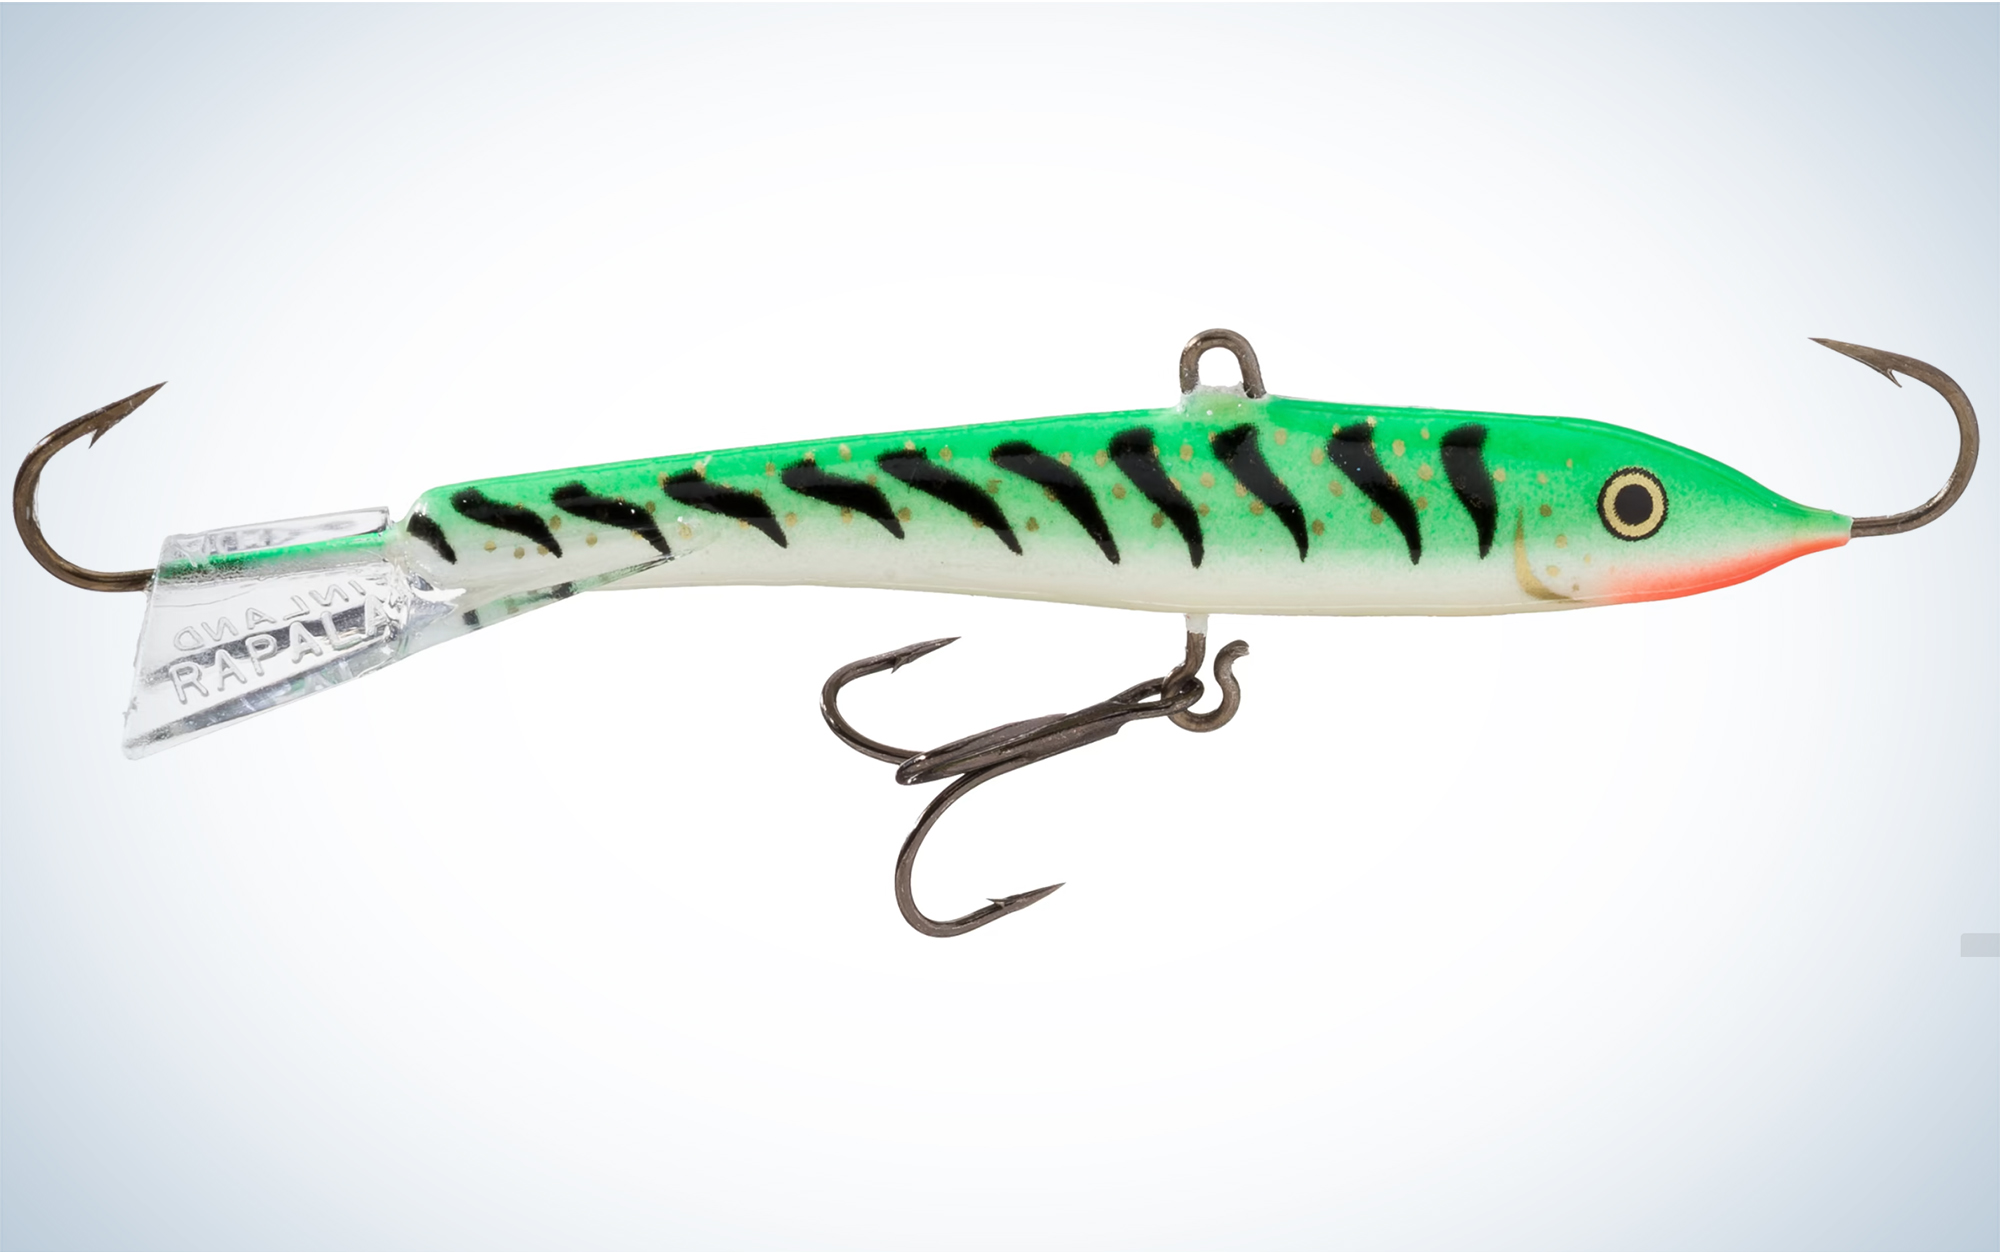 The Rapala Jigging Rap is one of the best ice fishing lures.